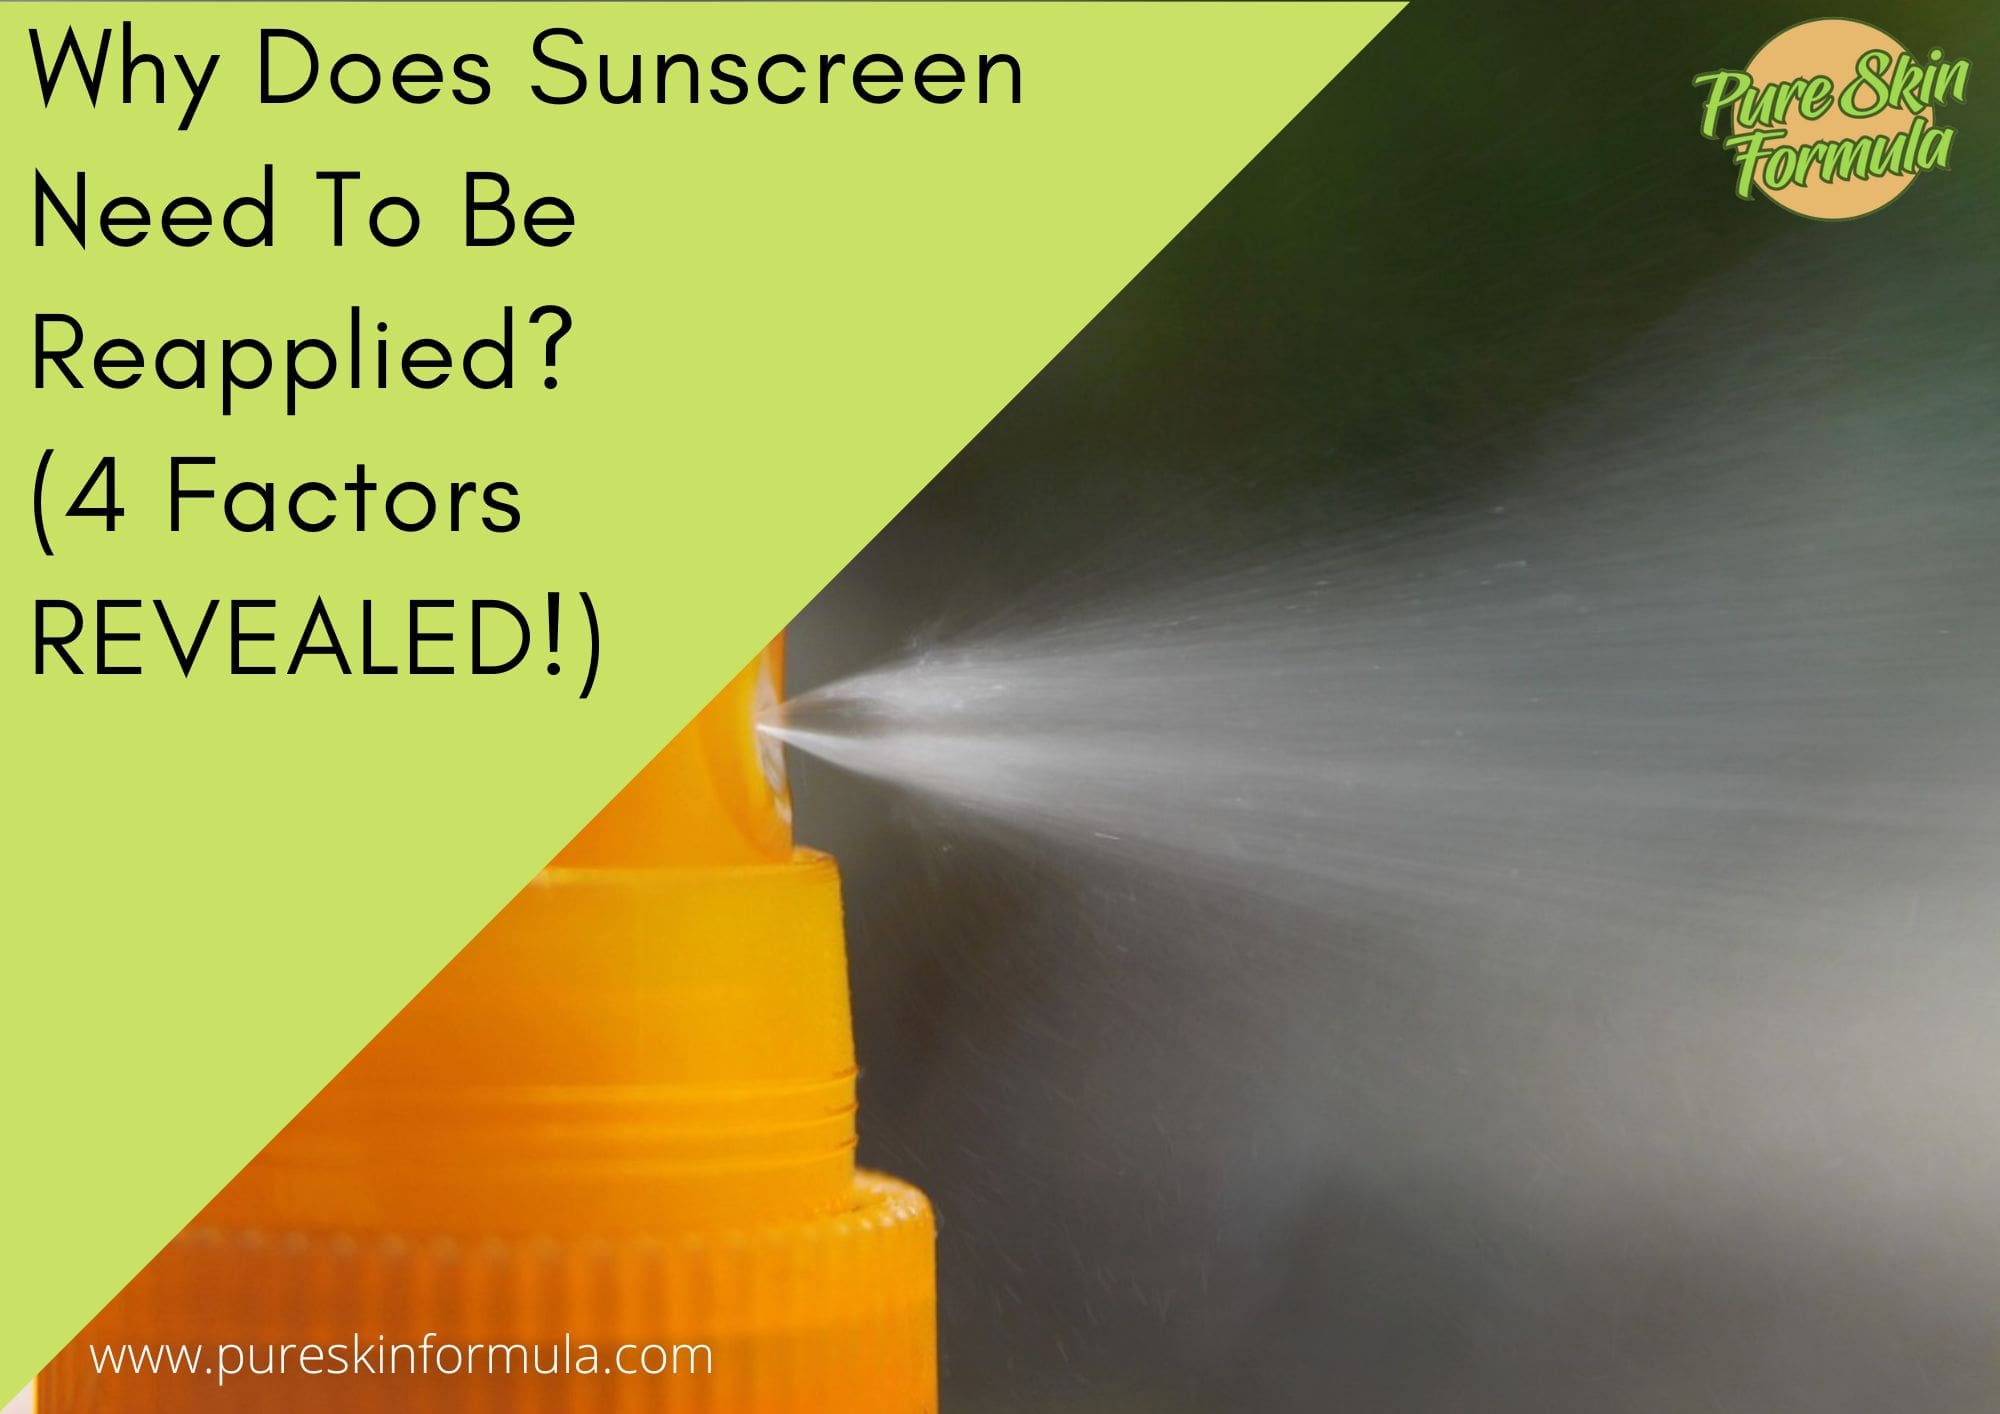 Why Does Sunscreen Need To Be Reapplied_featured image